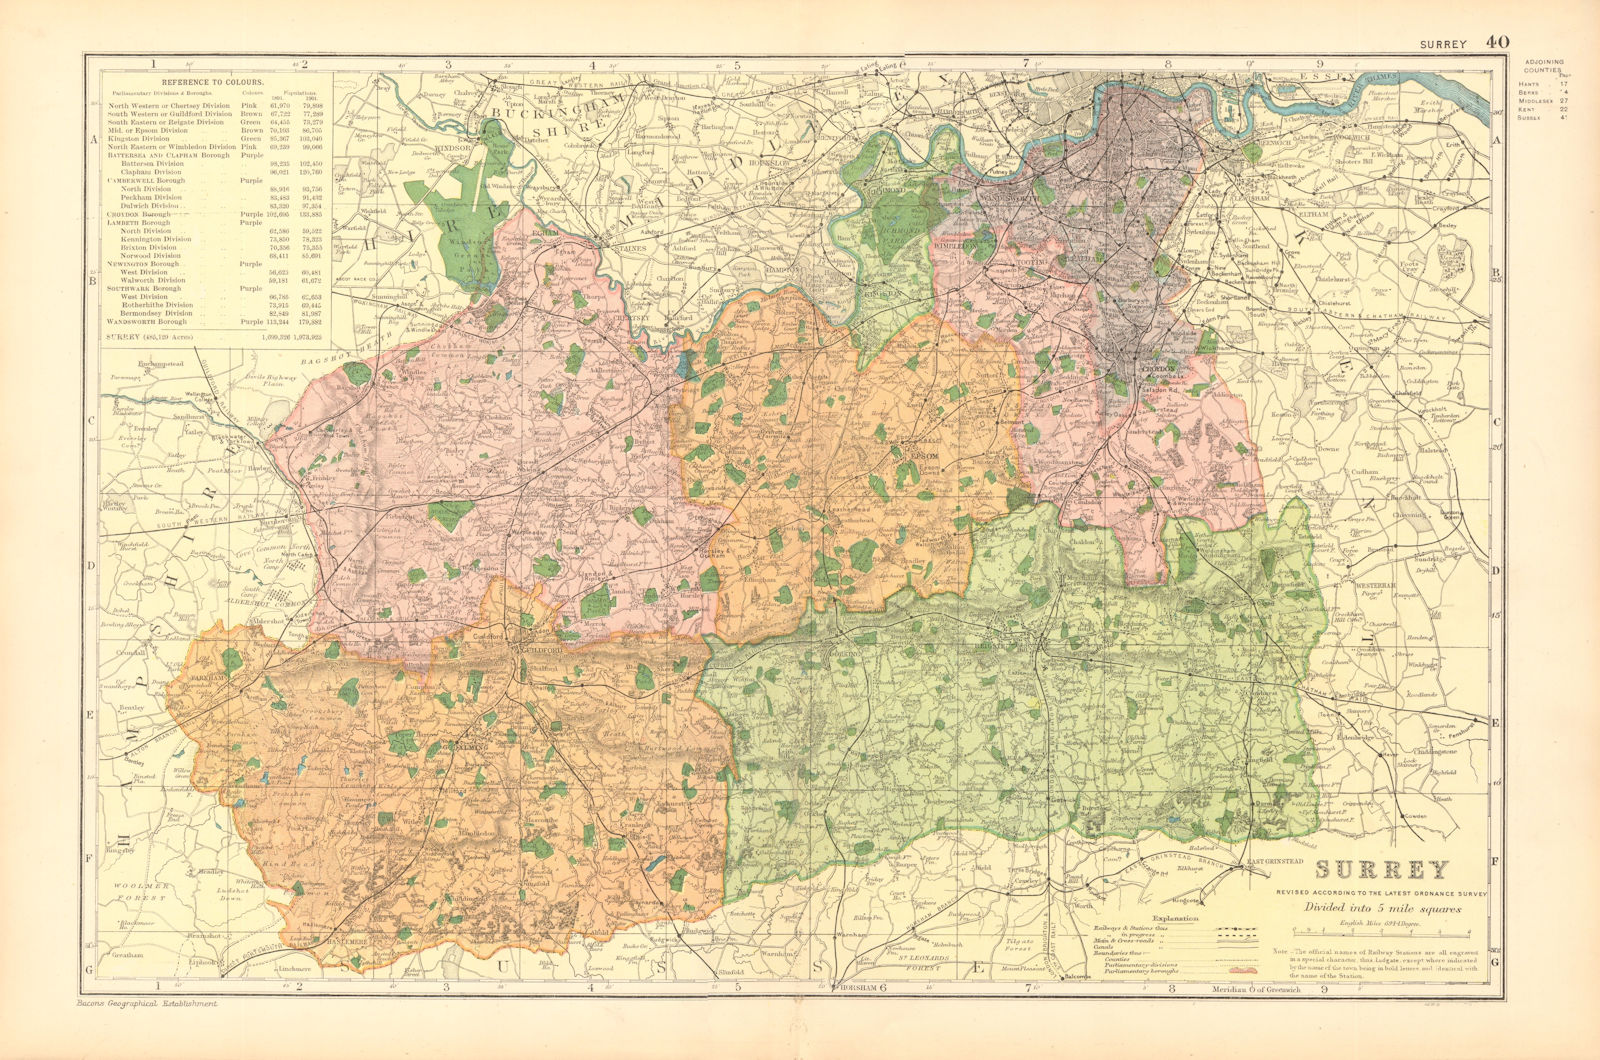 SURREY. Showing Parliamentary divisions, boroughs & parks. BACON 1904 old map